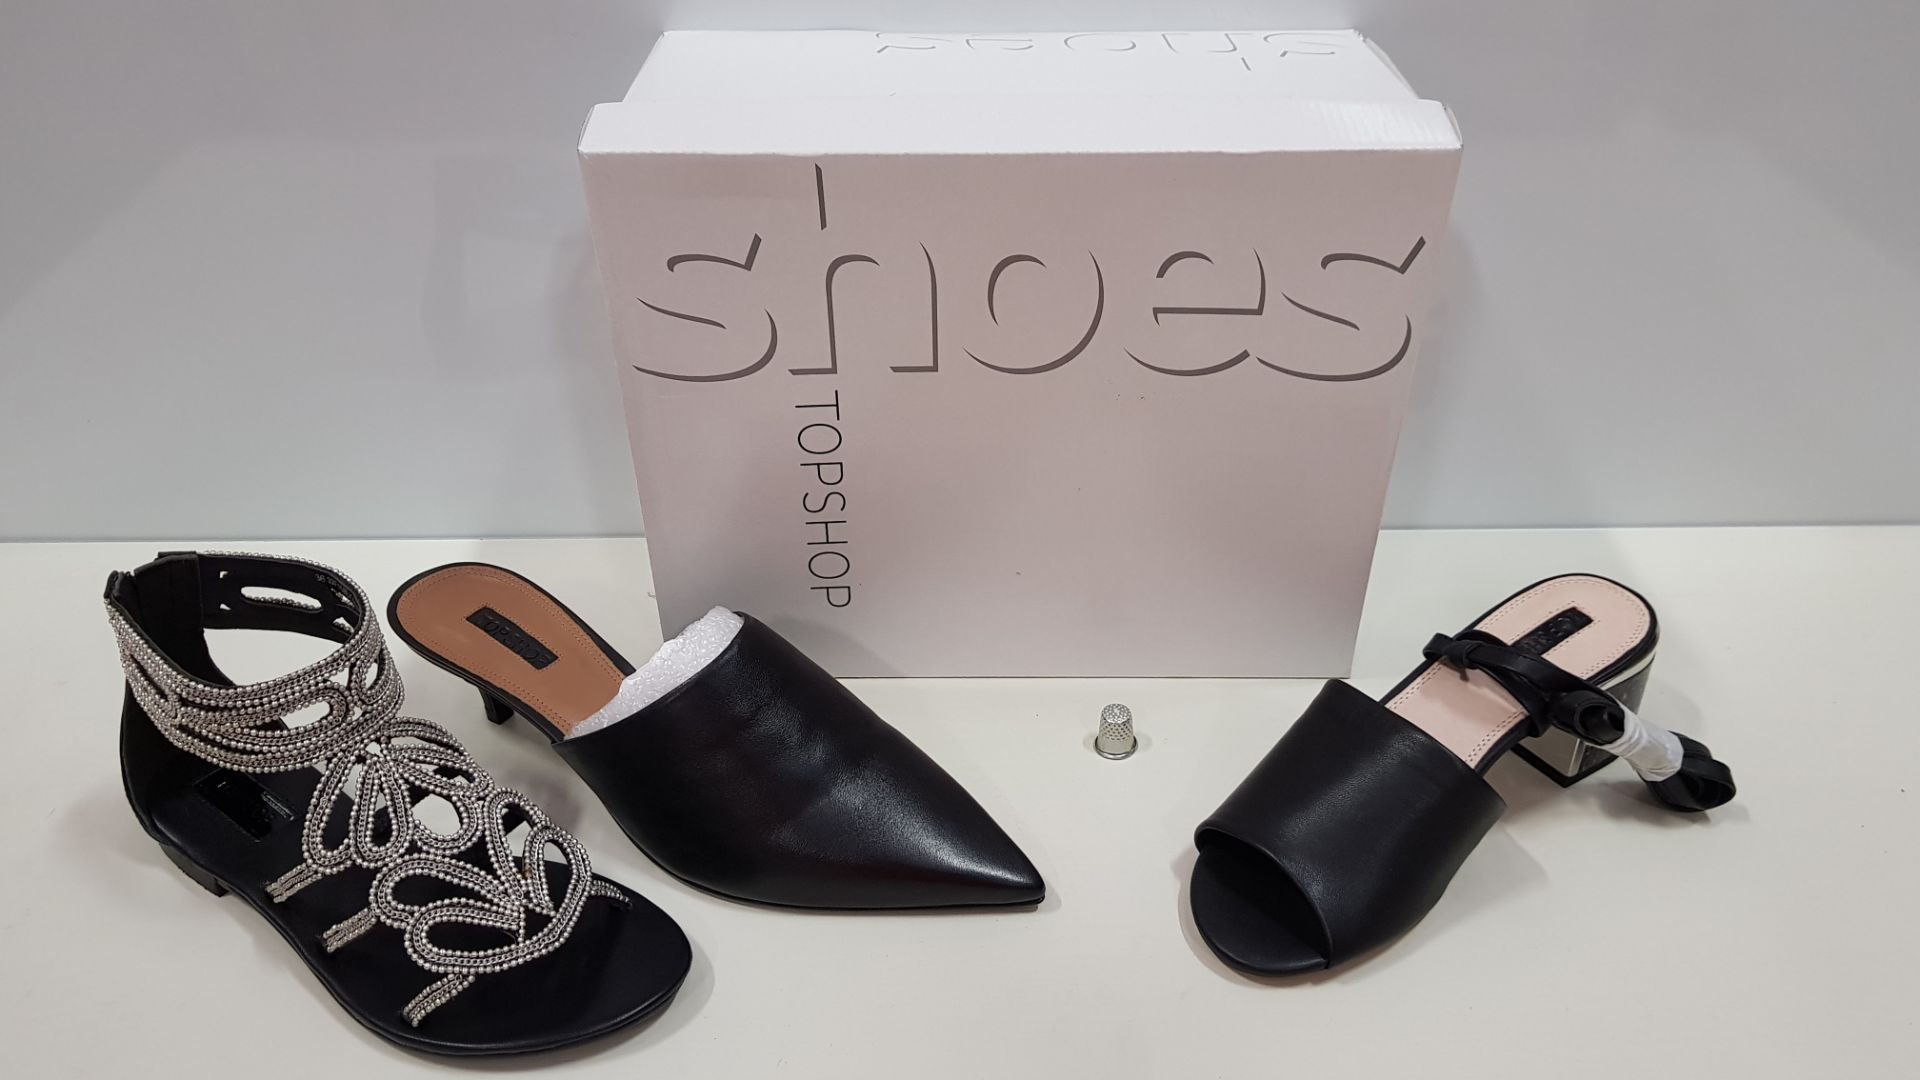 15 X BRAND NEW TOPSHOP SHOES IN VARIOUS STYLES AND SIZES - IE KIWI BLACK SHOES, FUSION BLACK AND